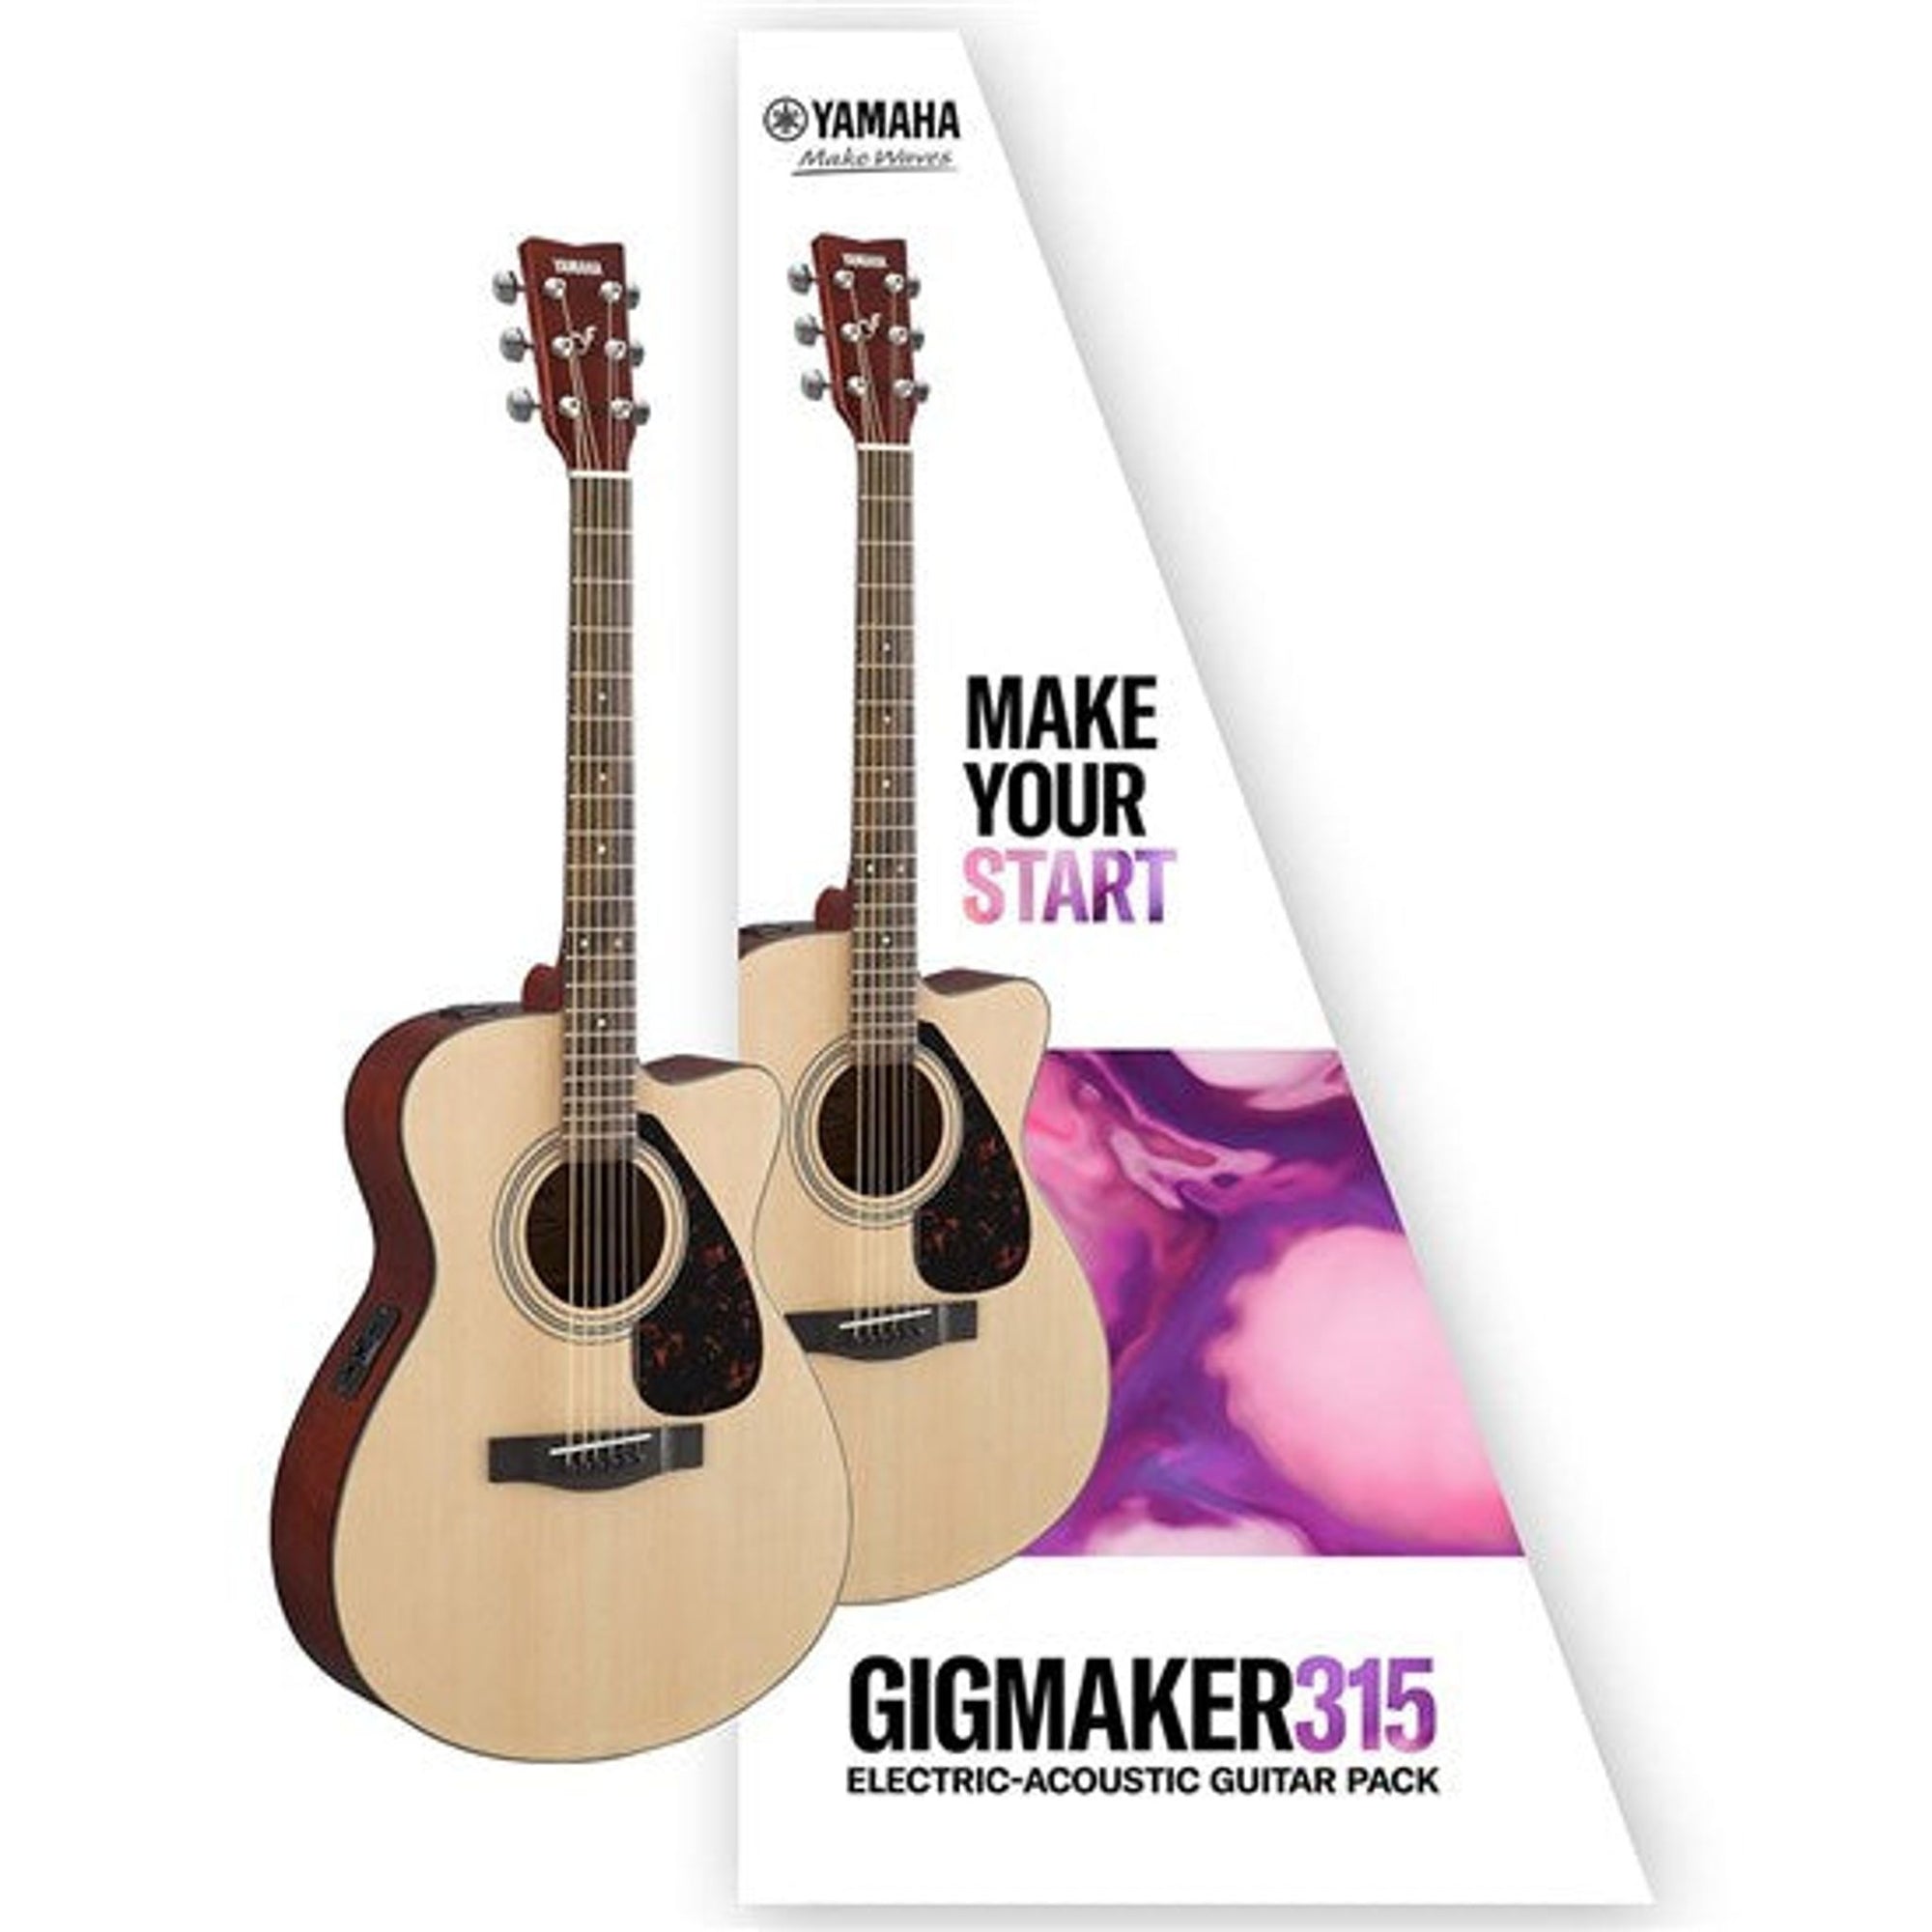 The Yamaha Gigmaker 310 Electric-Acoustic Guitar Pack Pack is a great buy with a great sound and heaps of features. Perfect for playing at home or on the stage.